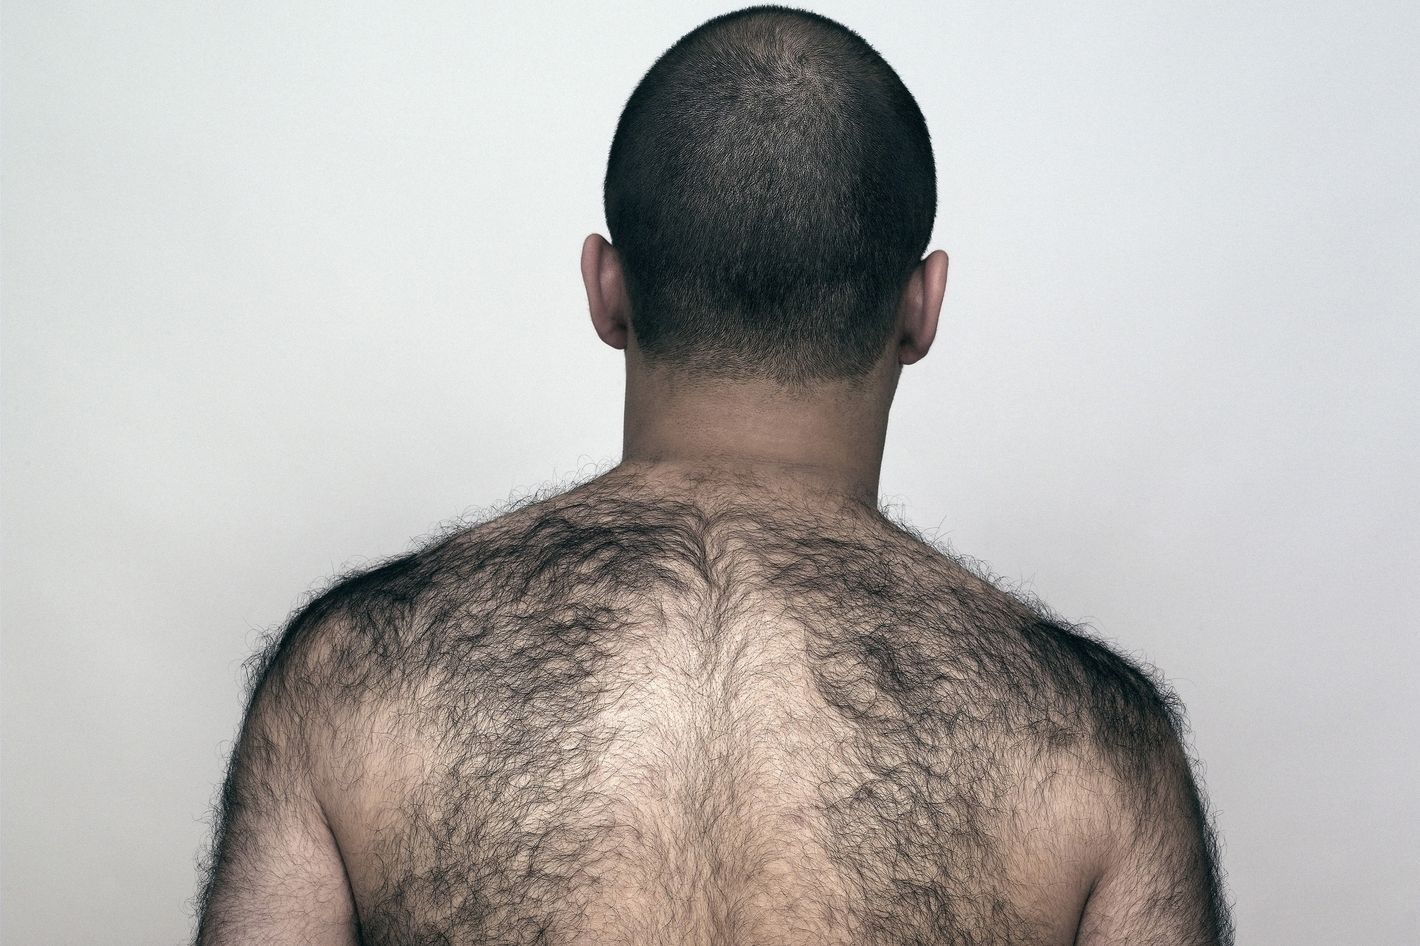 Backs why do some men have hairy What’s with